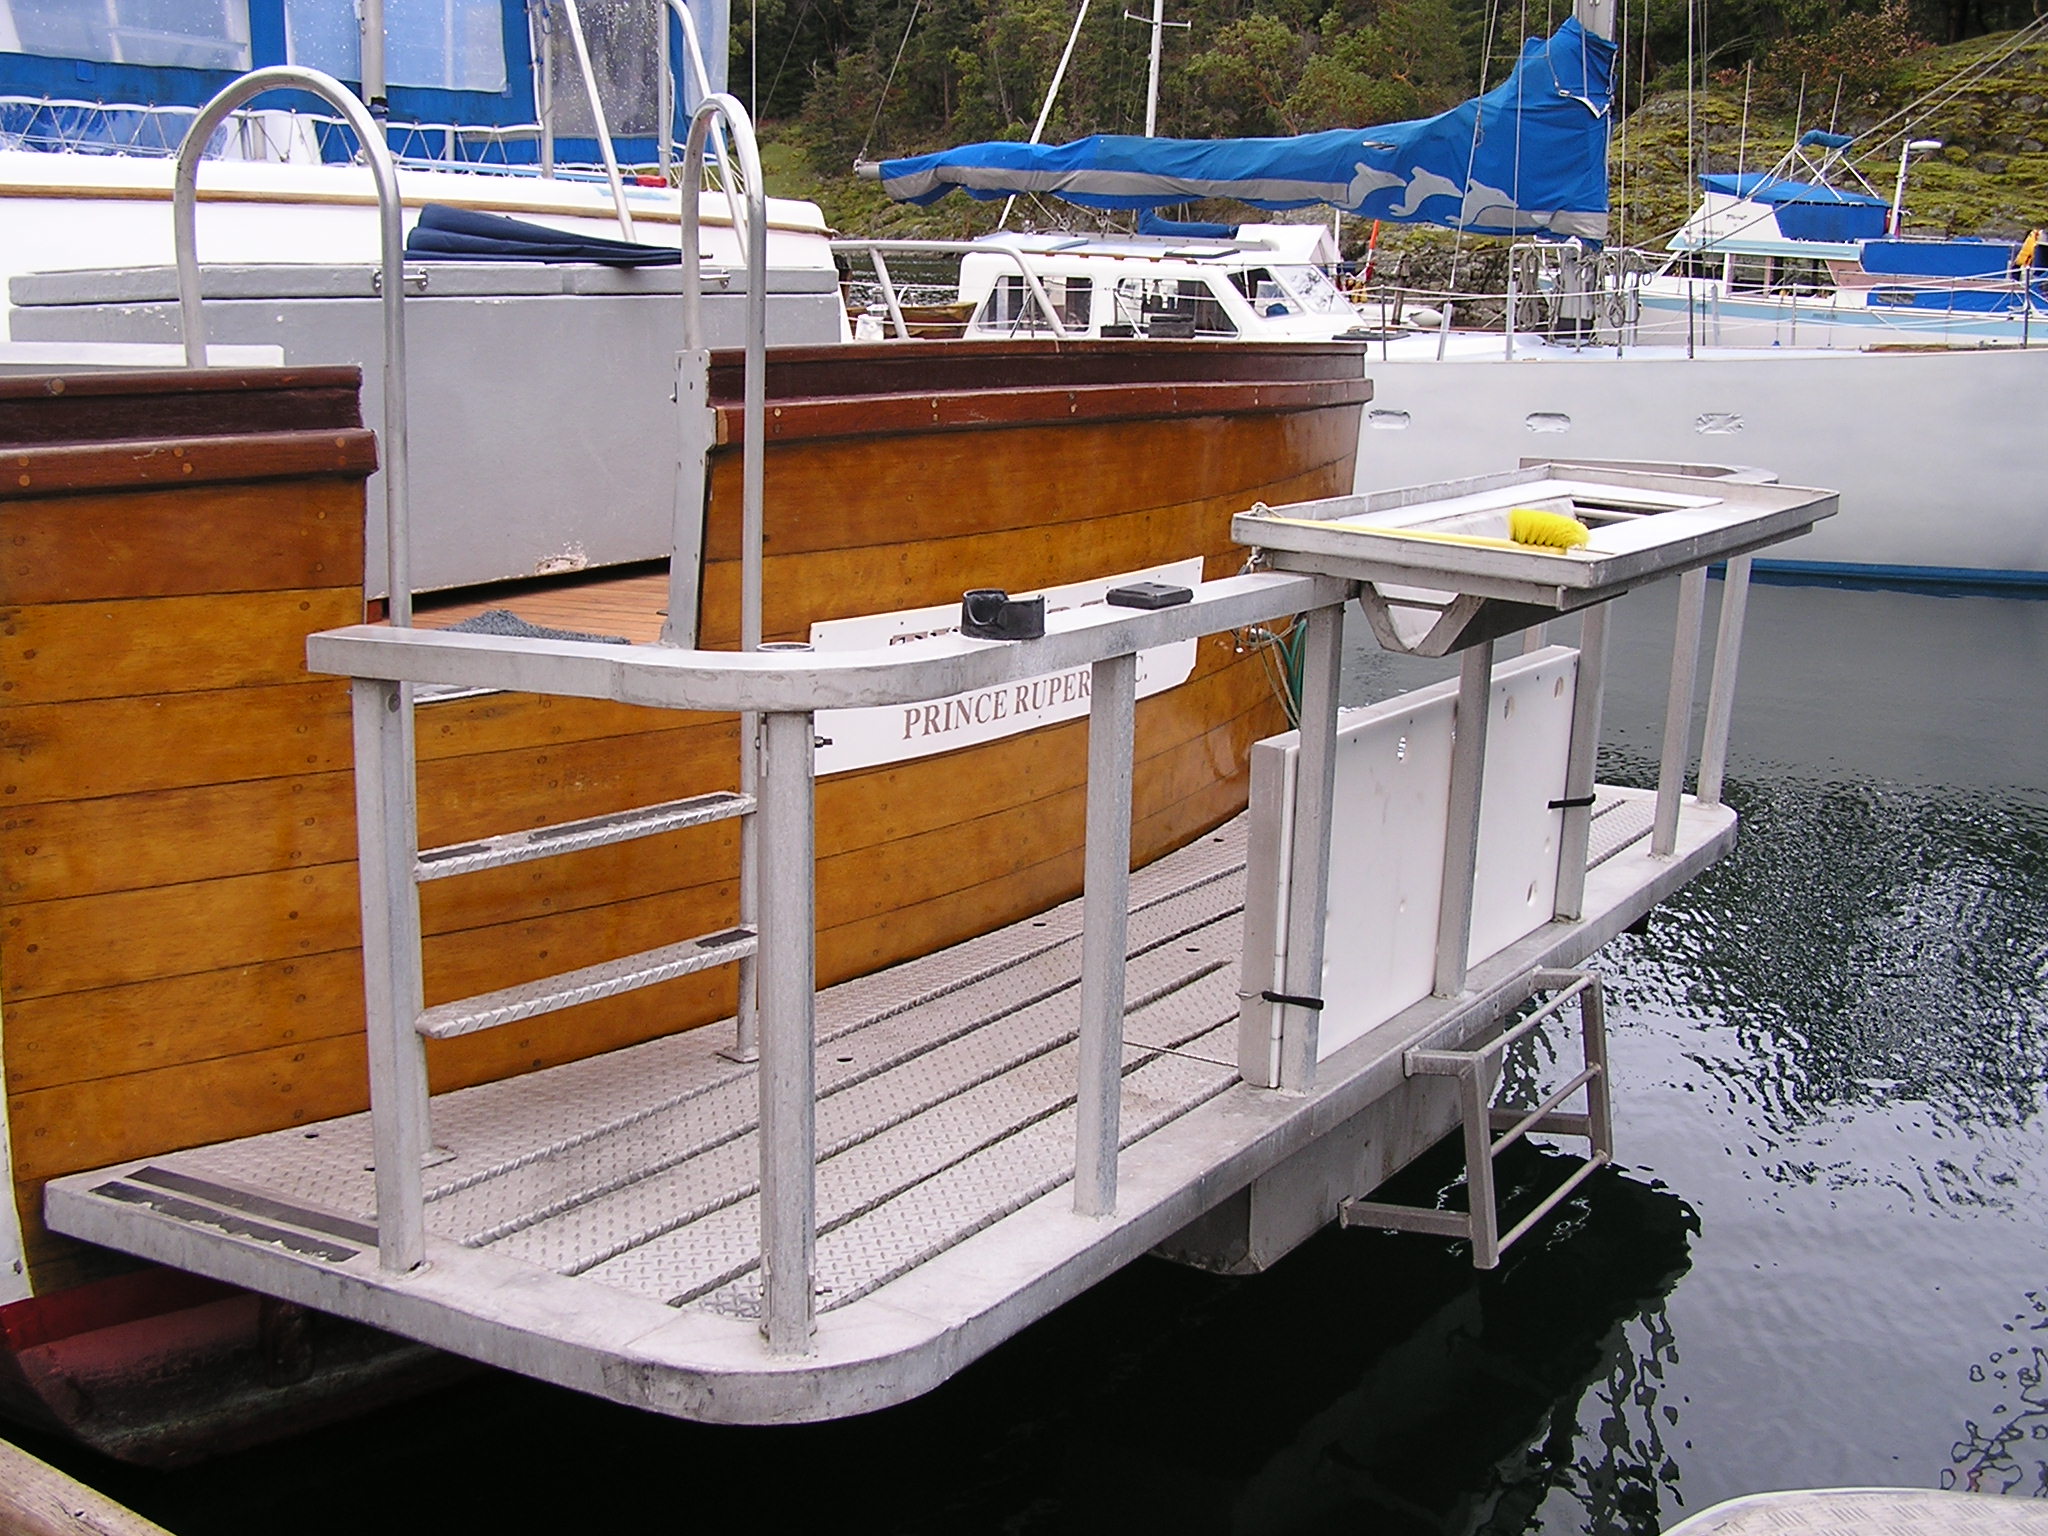 1984 52 foot Other Trawler Power boat for sale in British Columbia, Canada - image 2 